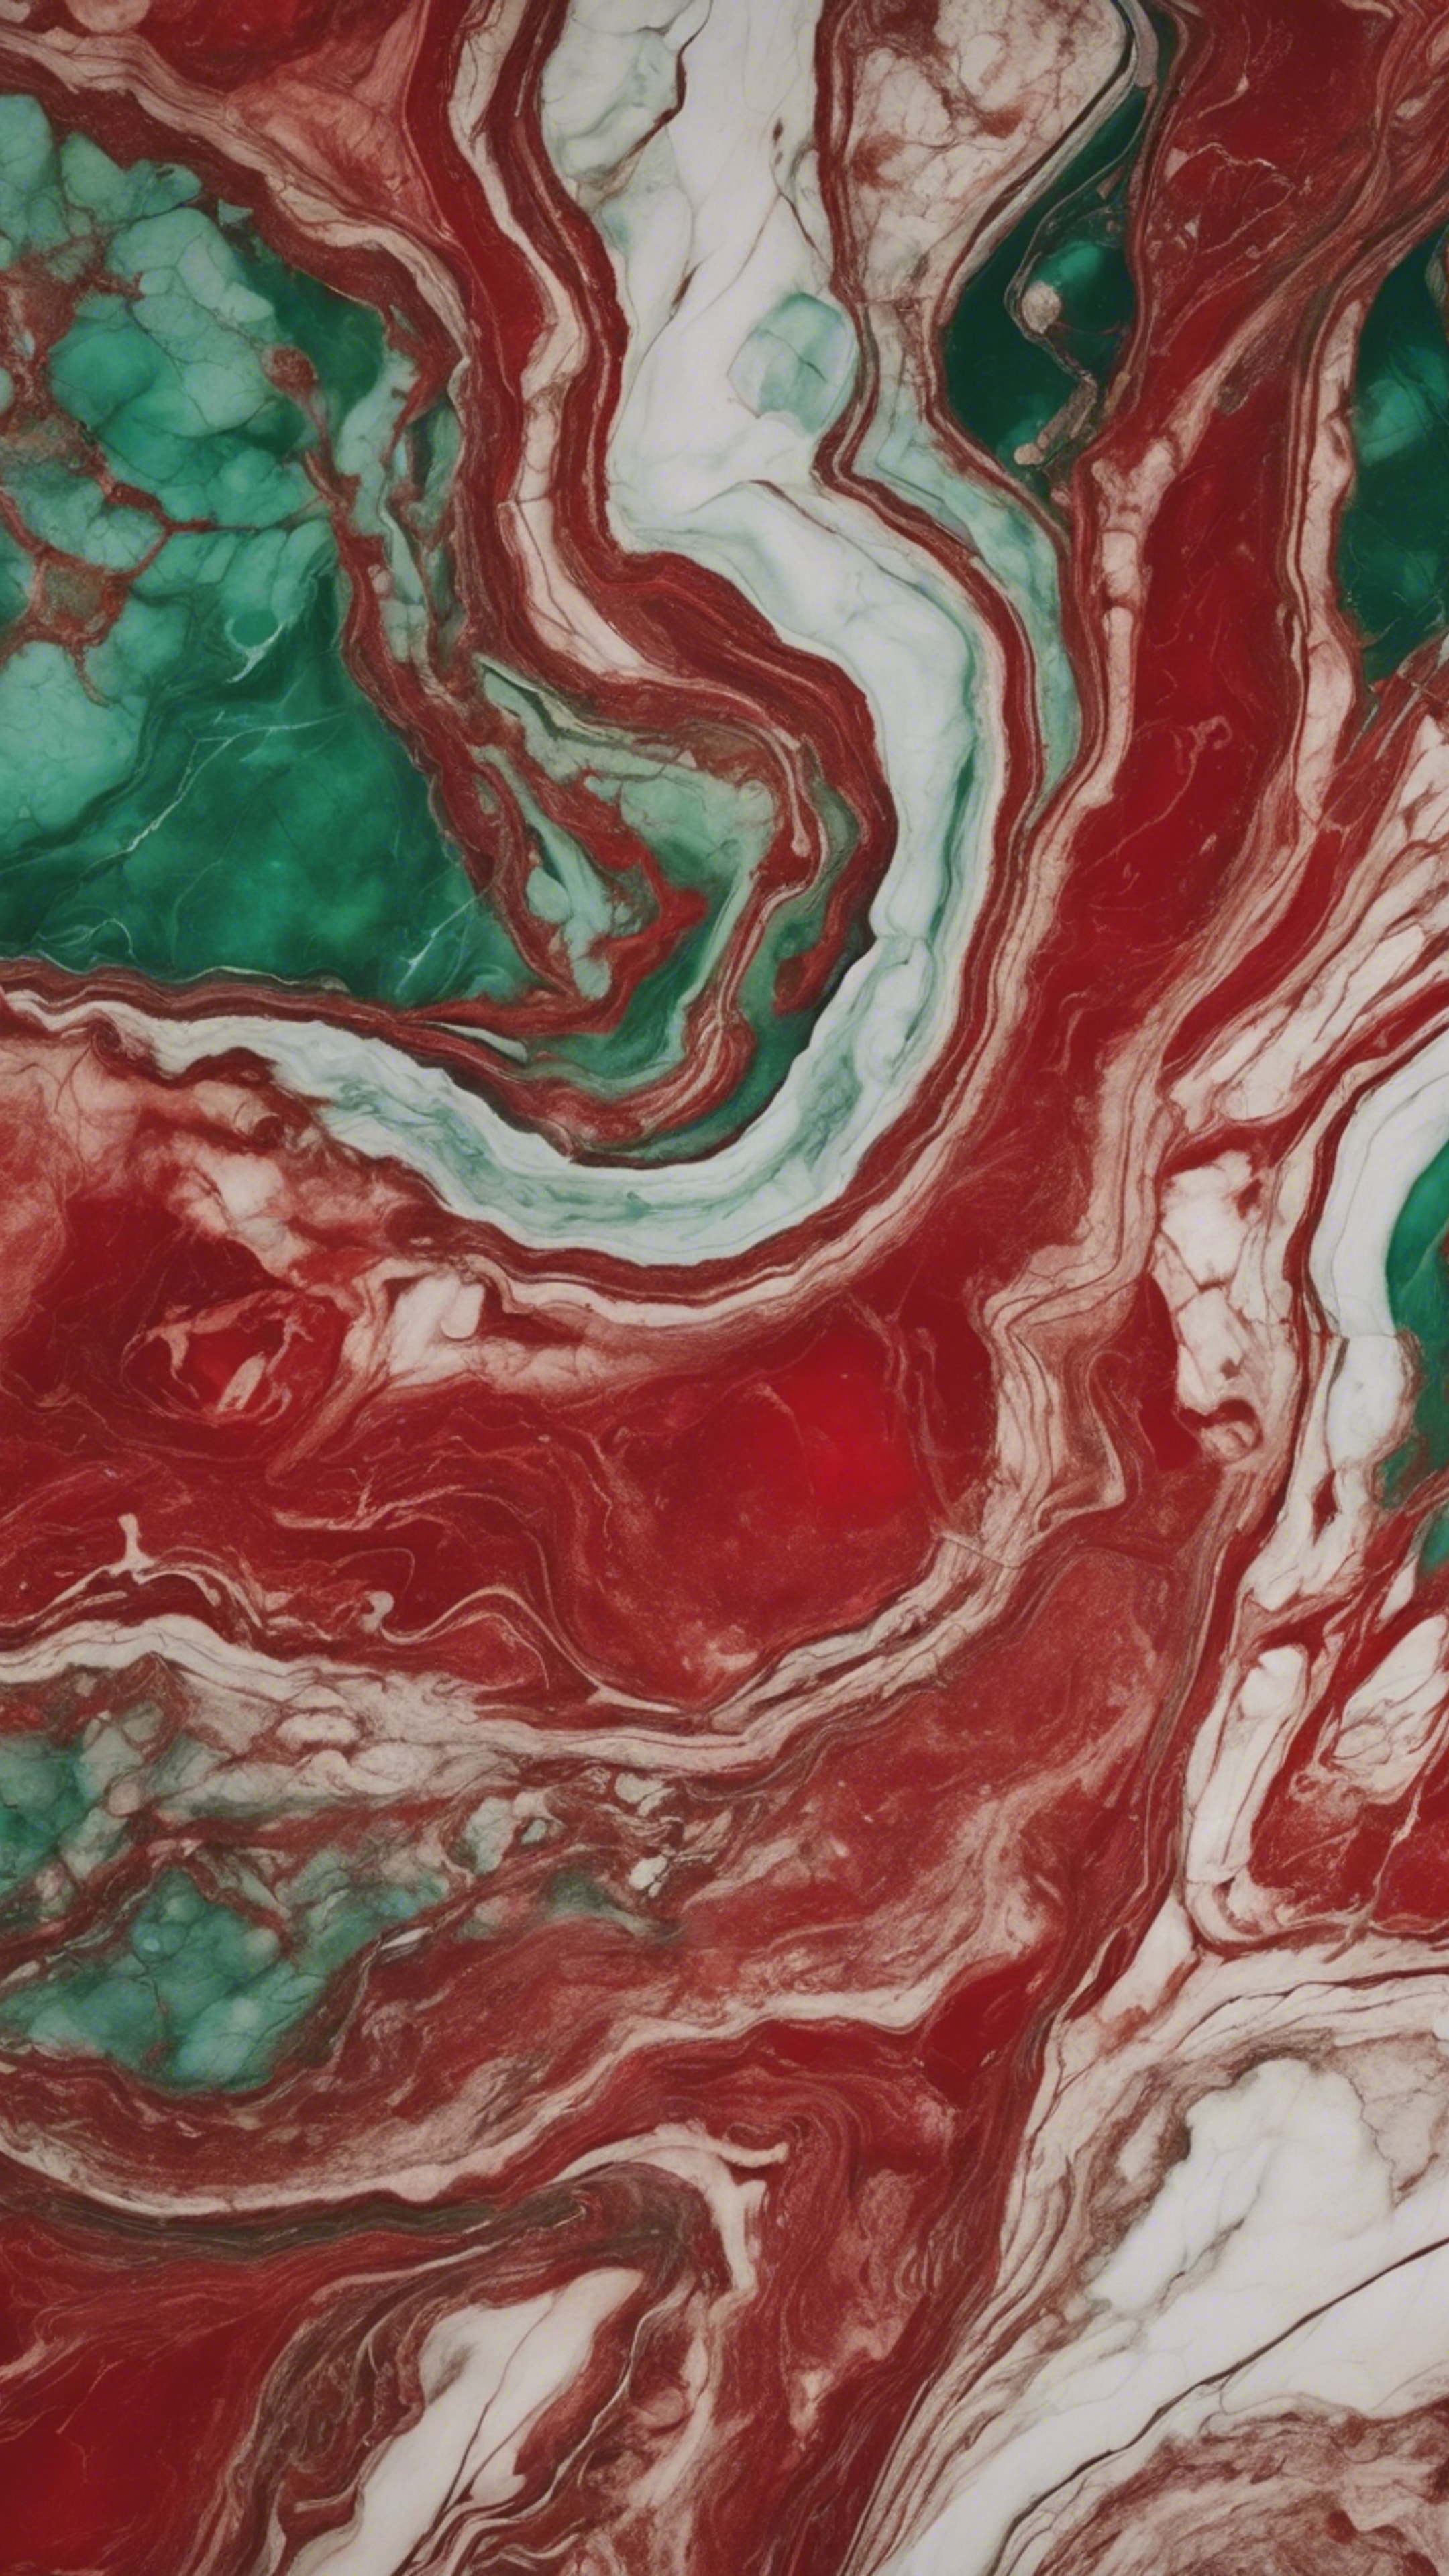 Elegant red and green marble pattern with veins running across. 牆紙[edb4d3fbd47c4b239d5a]